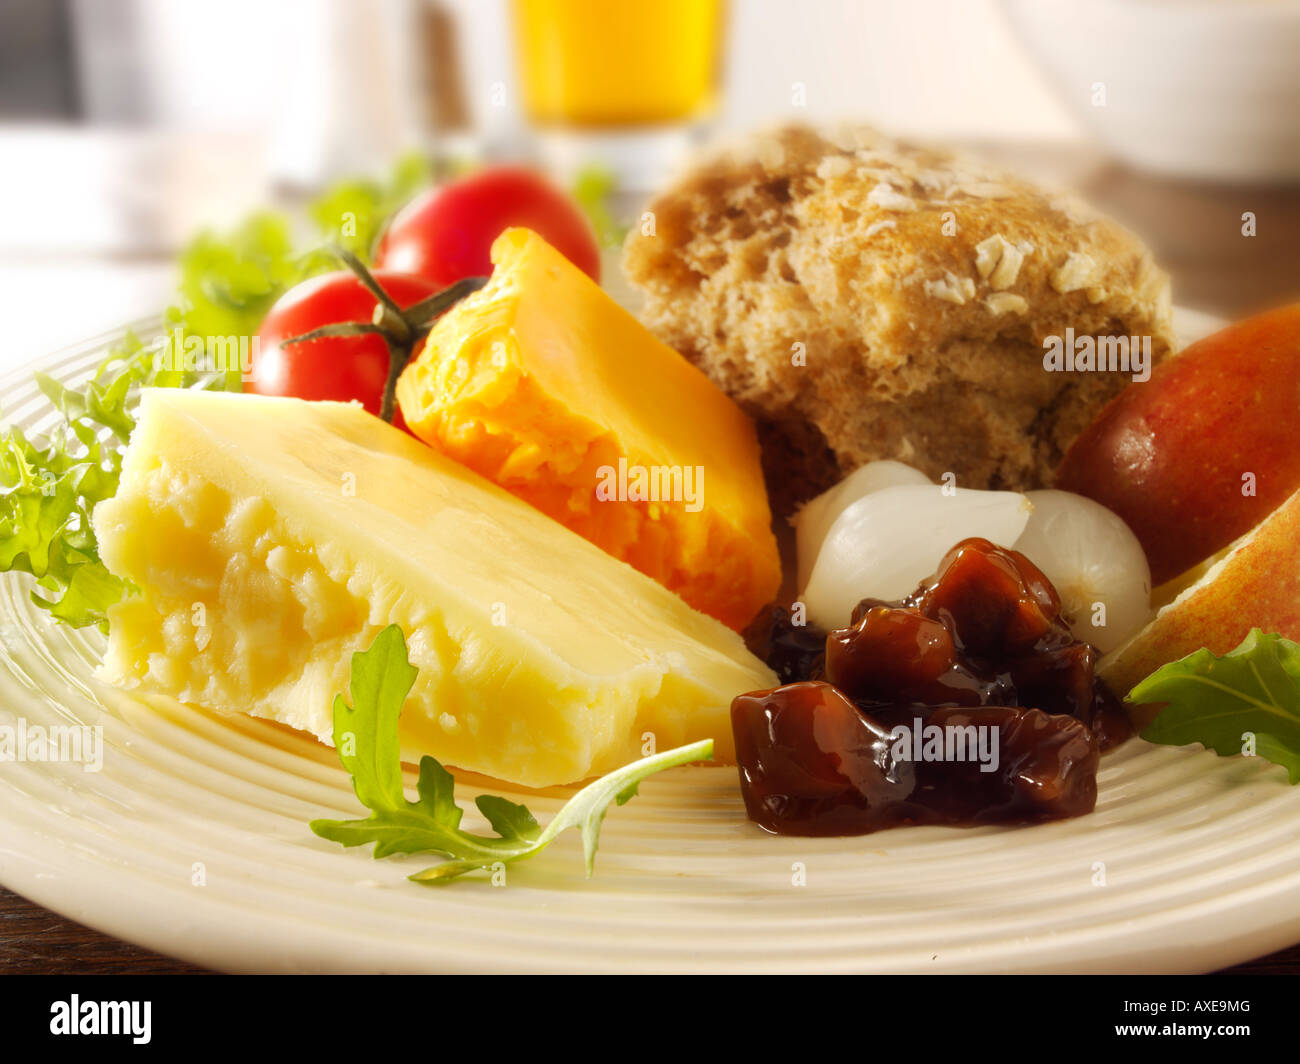 Traditional cheese Ploughman's with Cheddar & Red Leicester in a pub setting Stock Photo